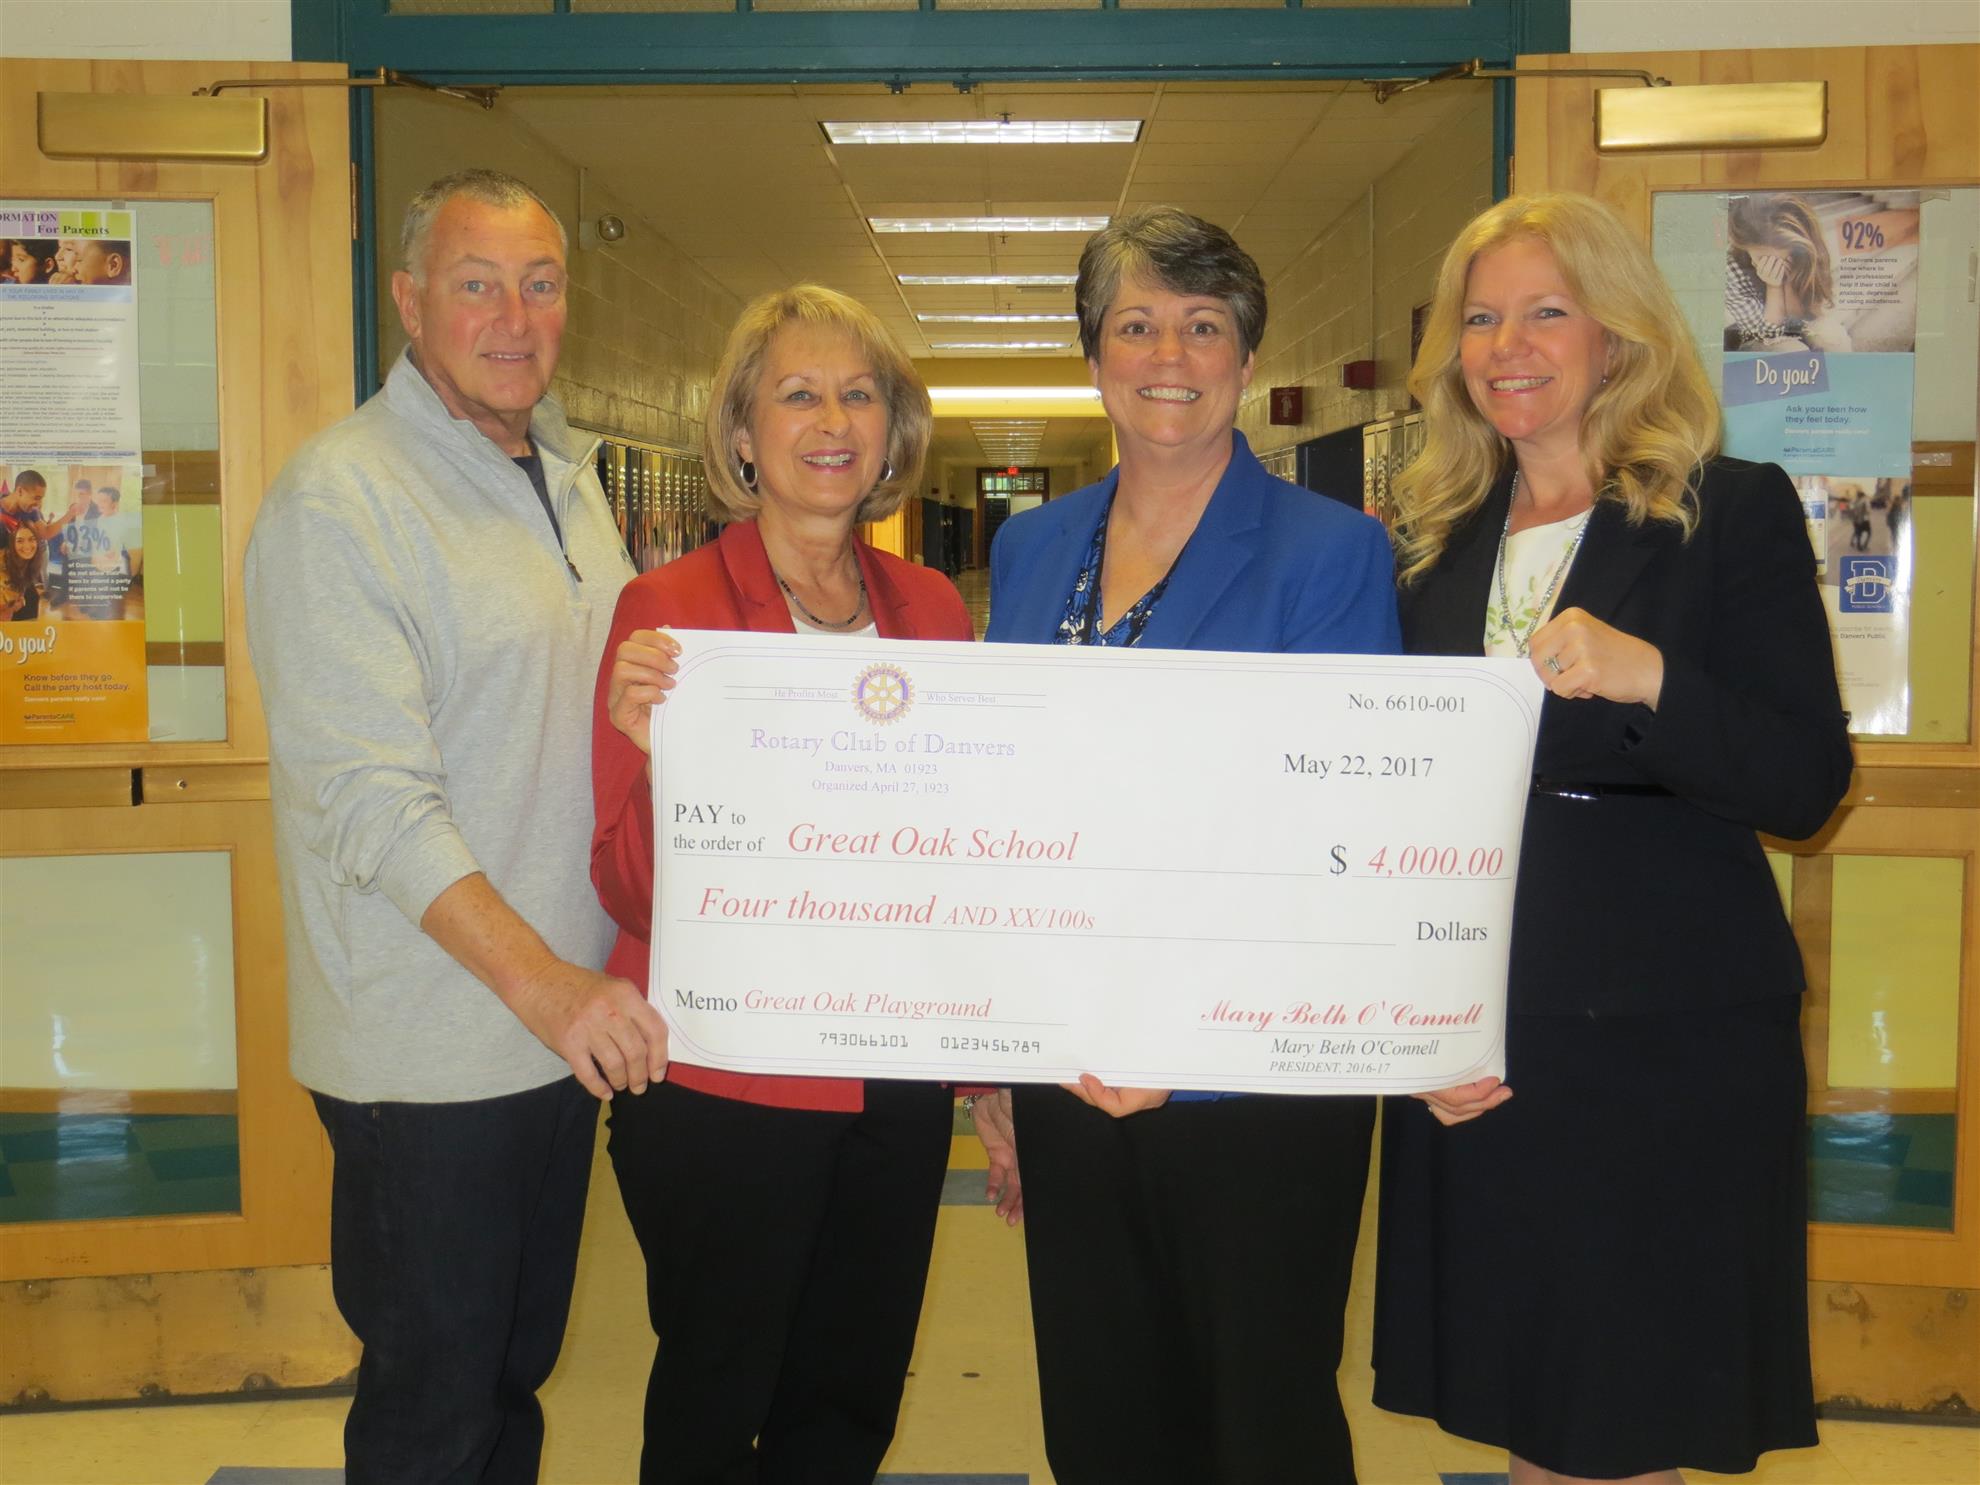 Danvers Supports Great Oak School Playground | District 7930